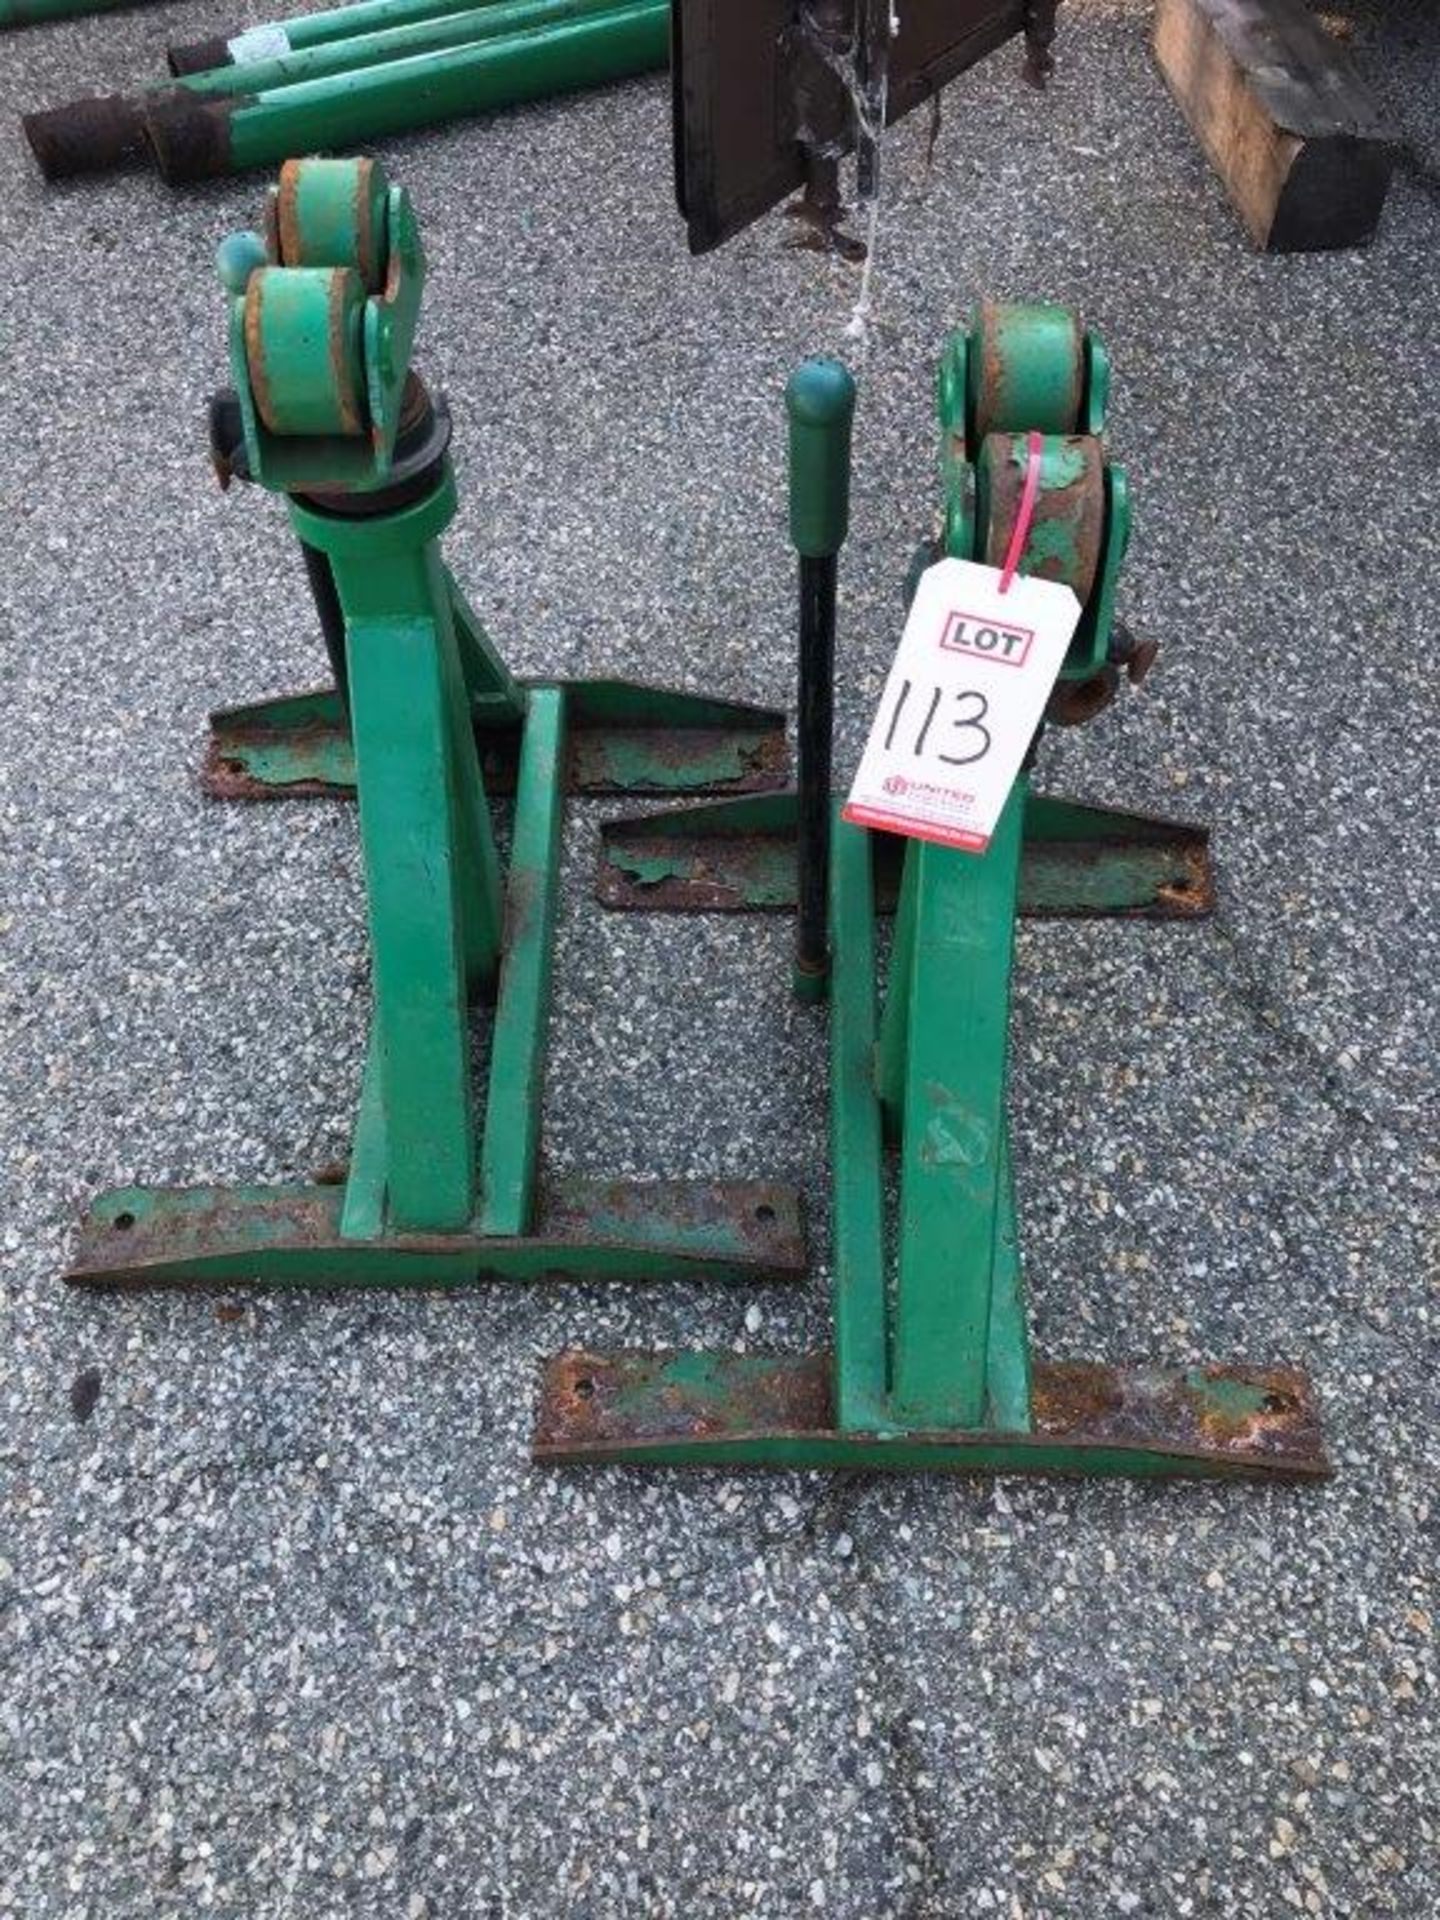 LOT - (2) GREENLEE MODEL 656 HEAVY DUTY RATCH REEL STANDS (LOCATION: FLEX CONTAINER)